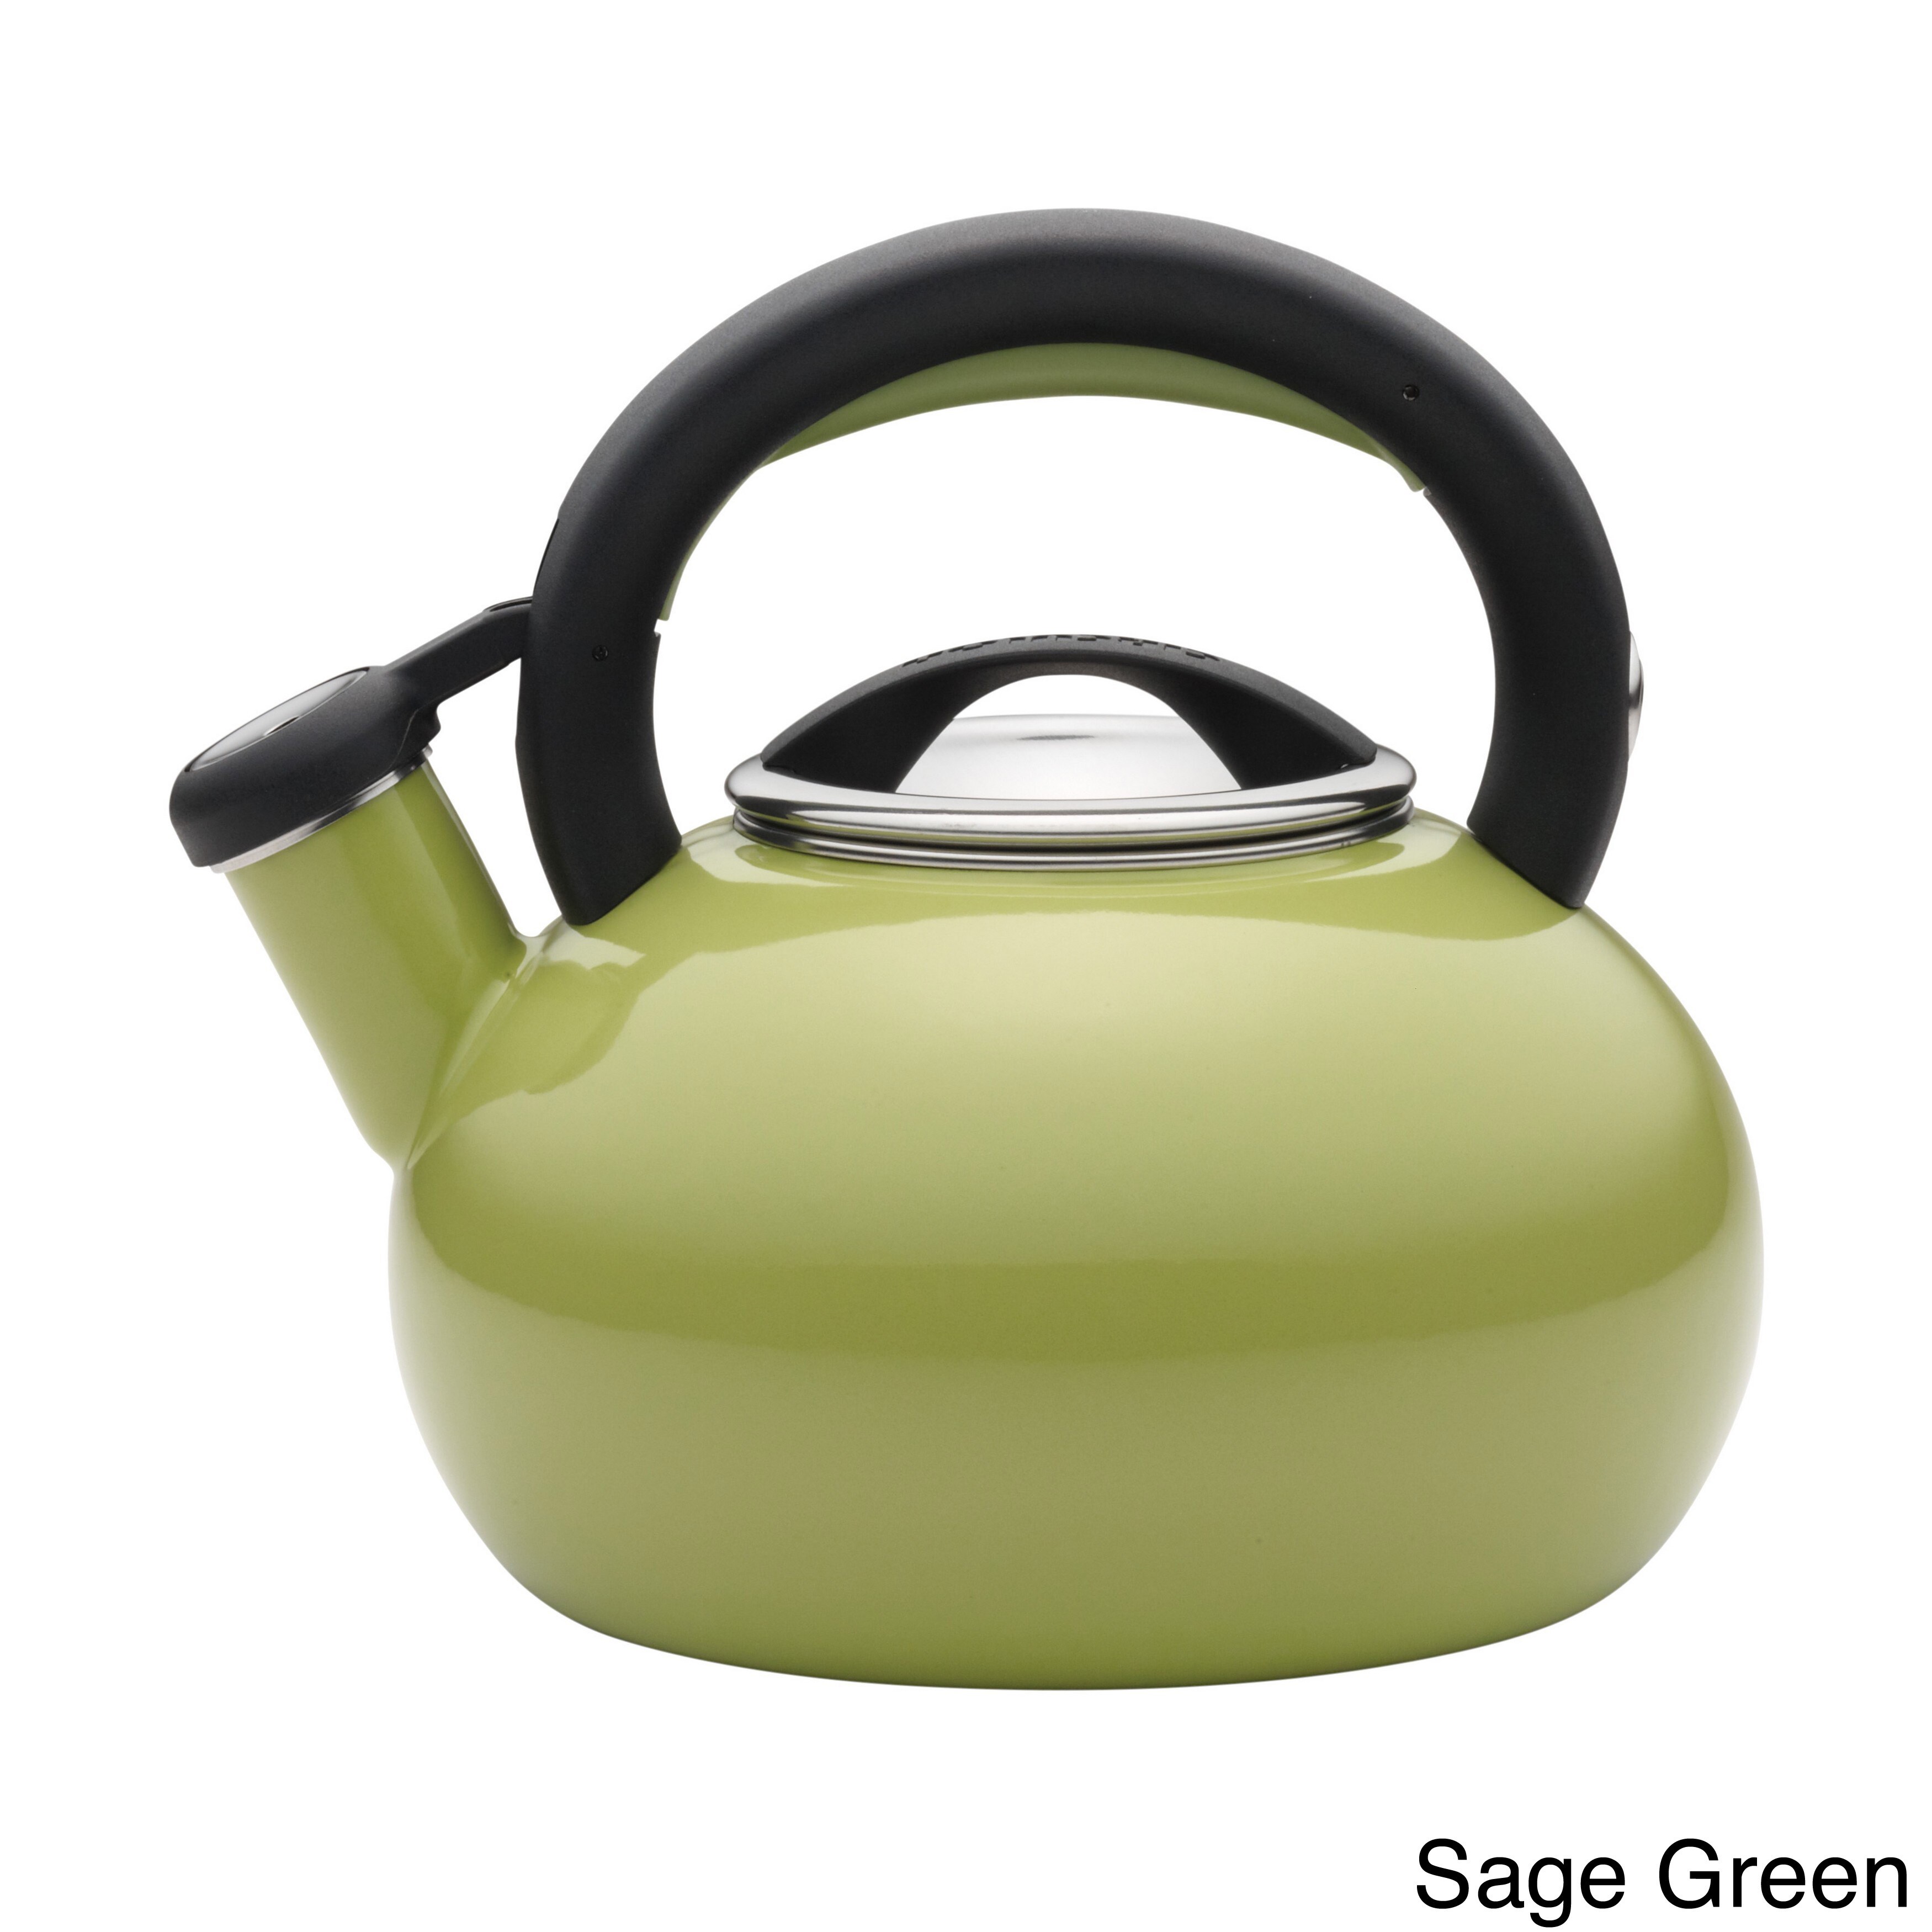 Circulon Enamel on Steel 2-Qt. Whistling Teakettle with Flip-Up Spout - Navy